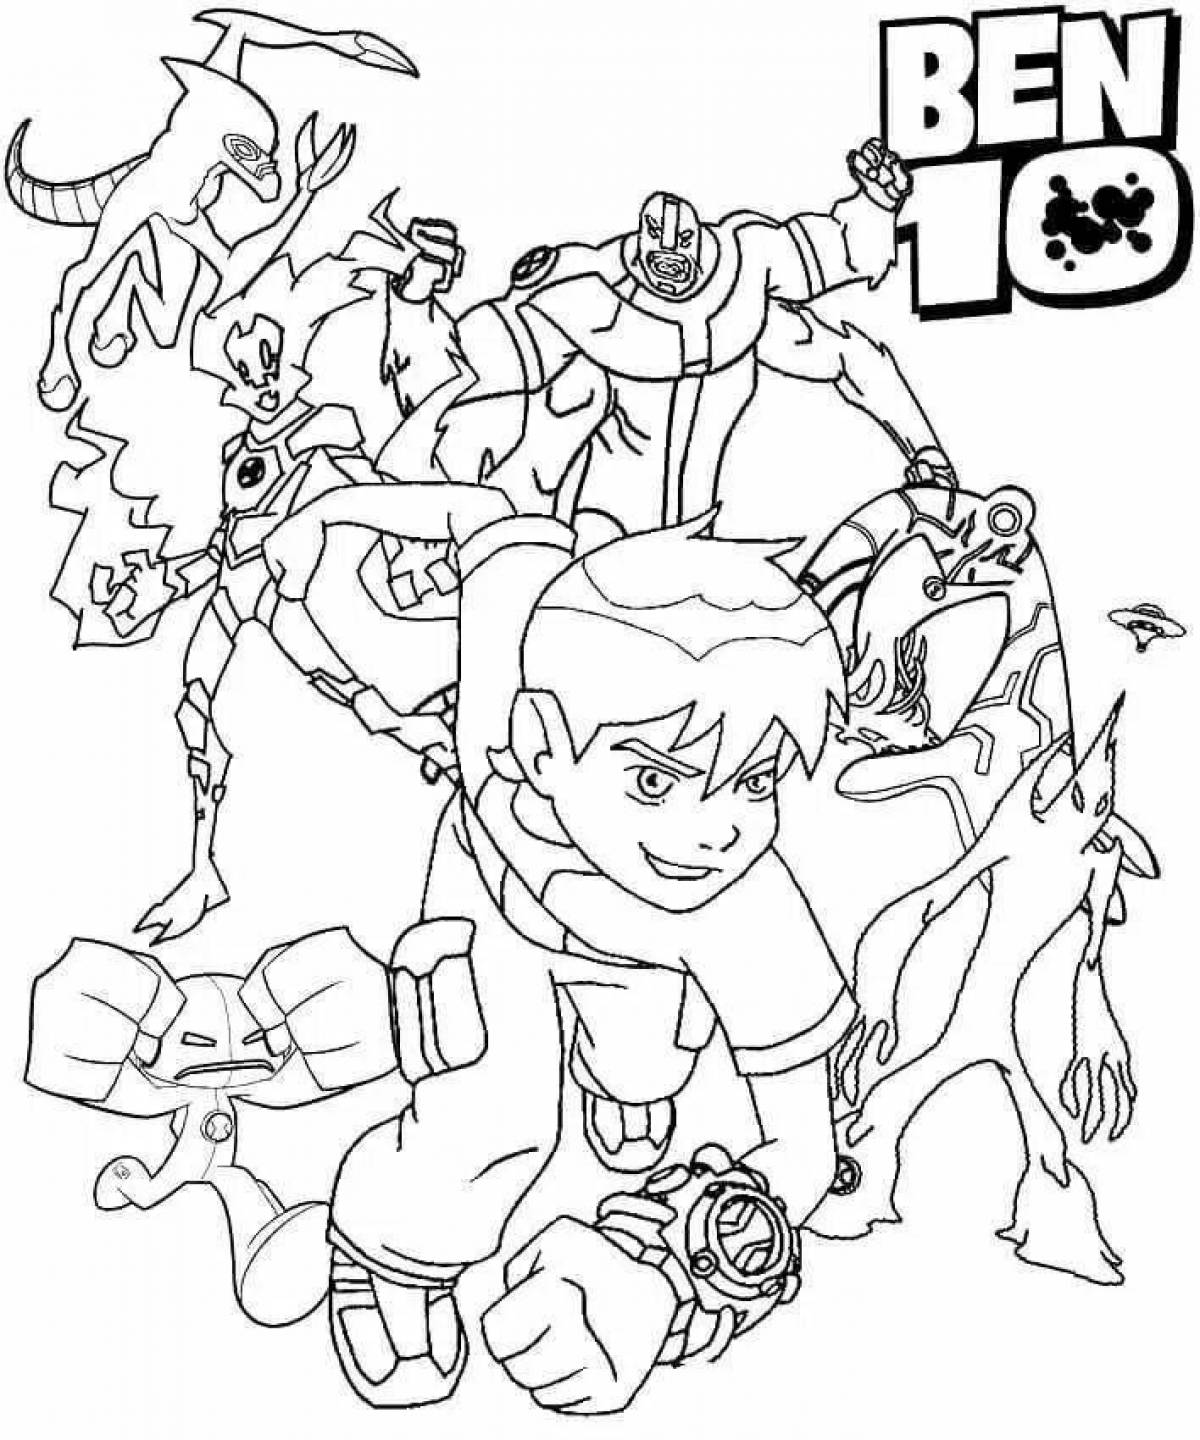 Ben's fascinating coloring page